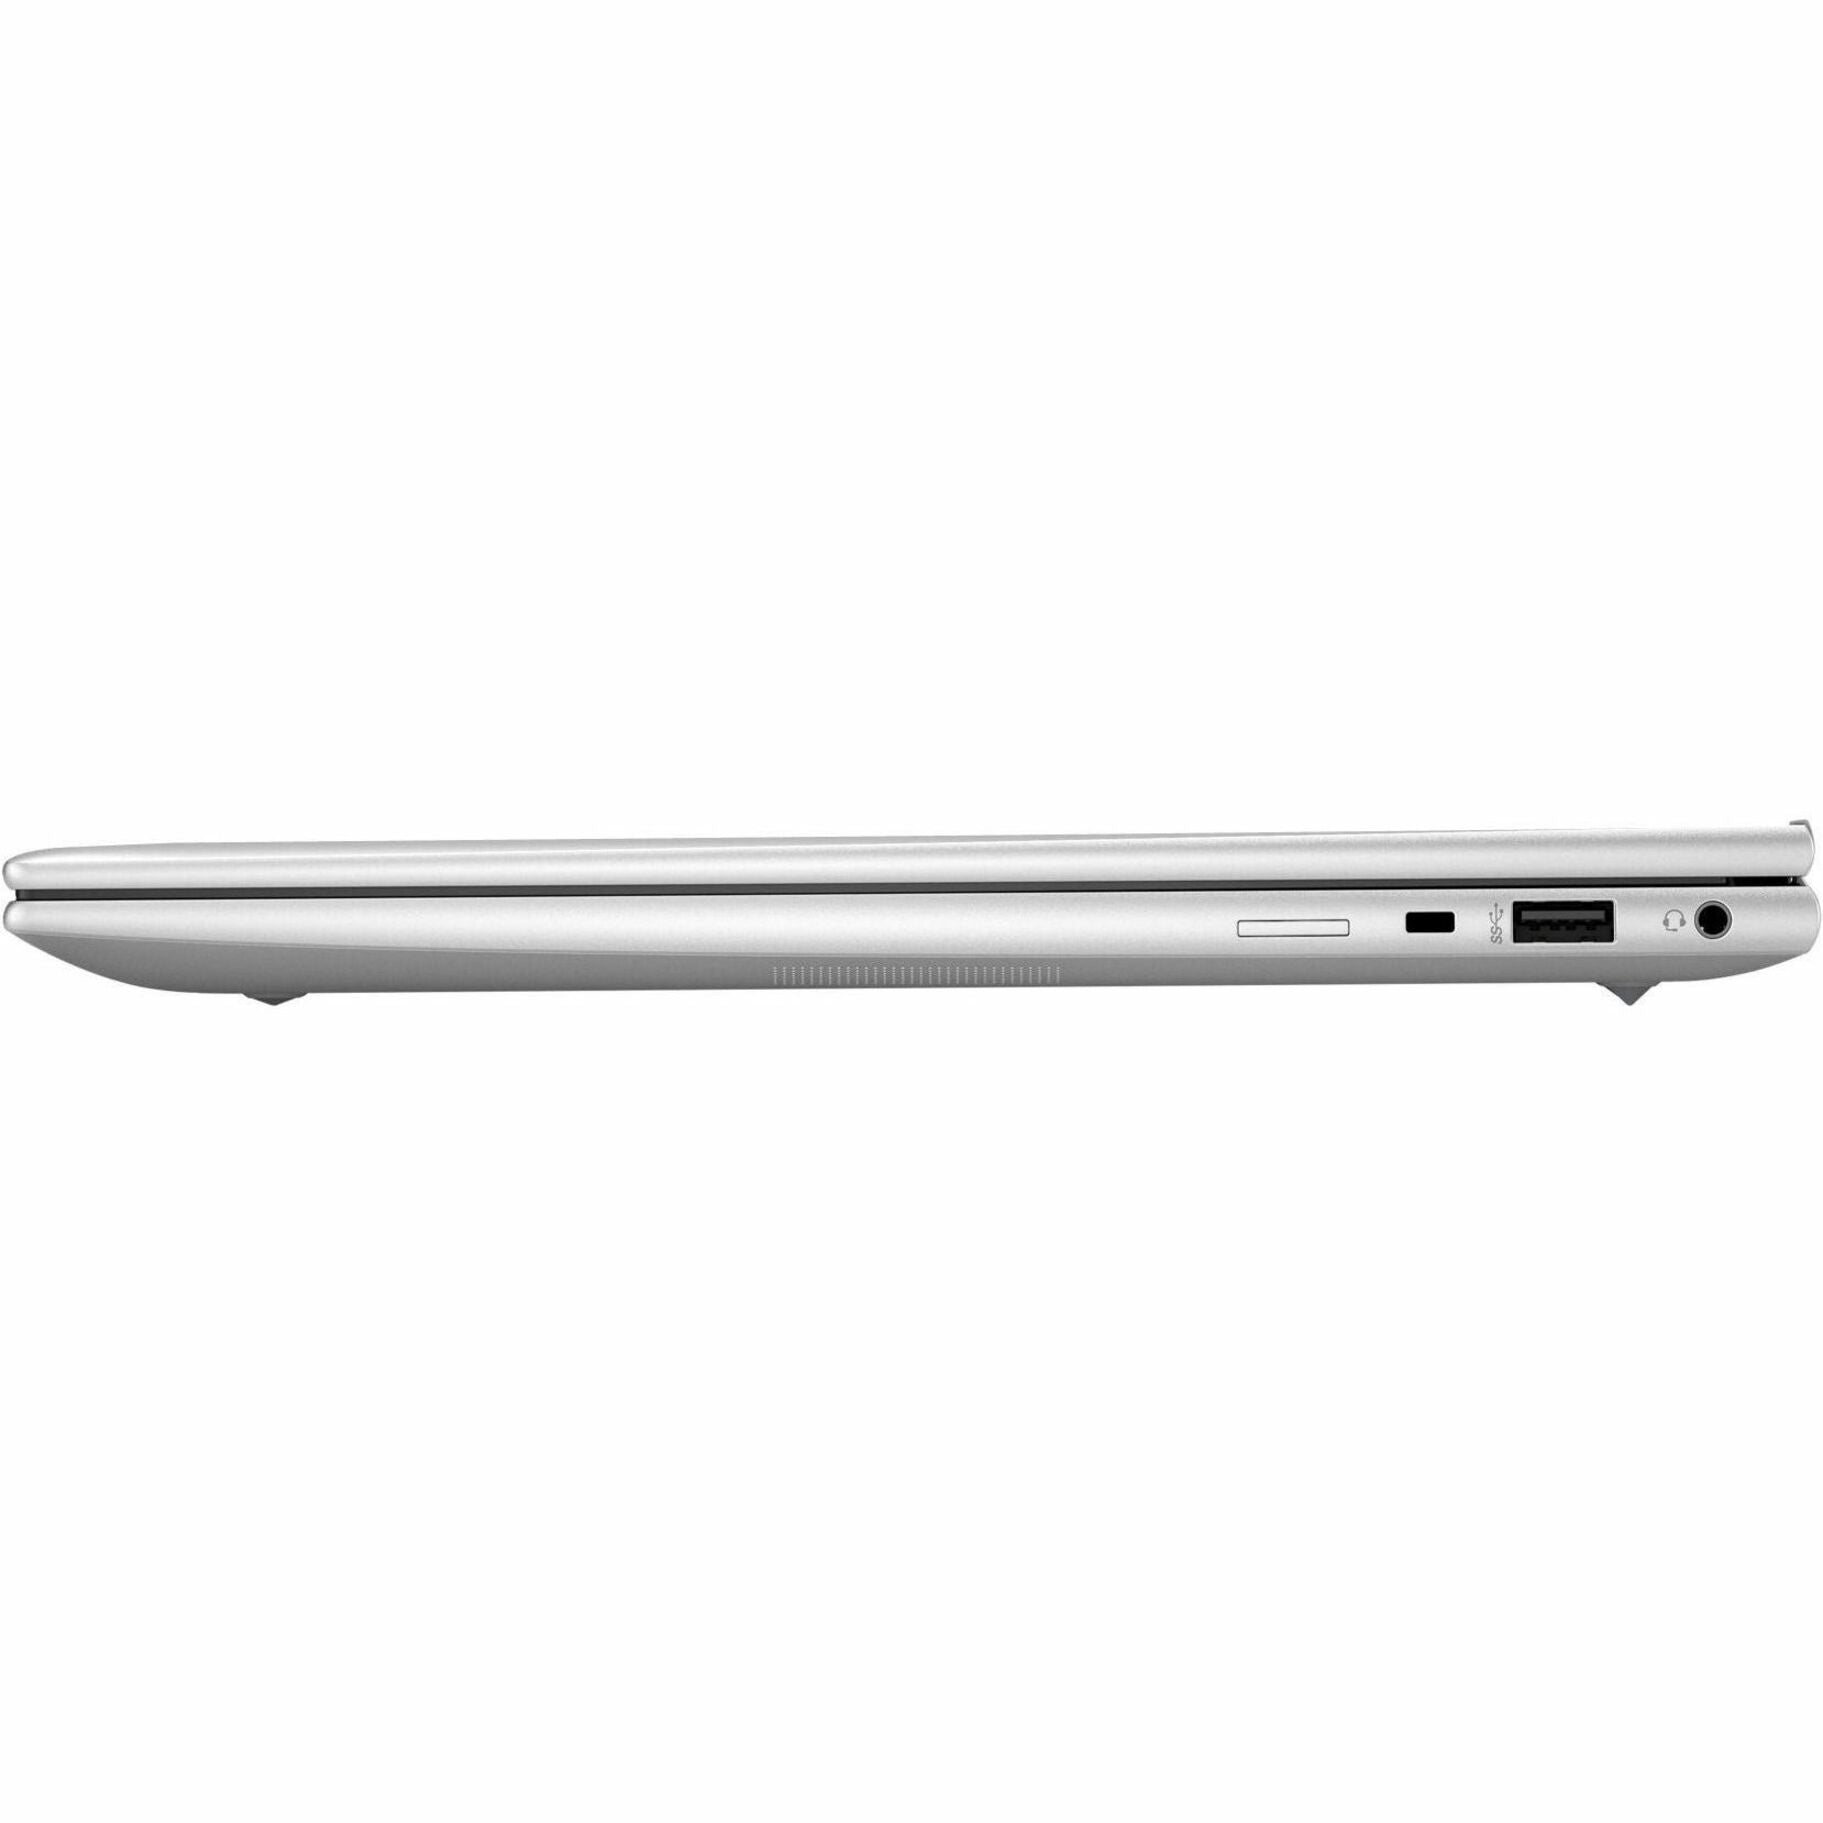 HP EliteBook 840 14" G9 Notebook PC Wolf Pro Security Edition [Discontinued]